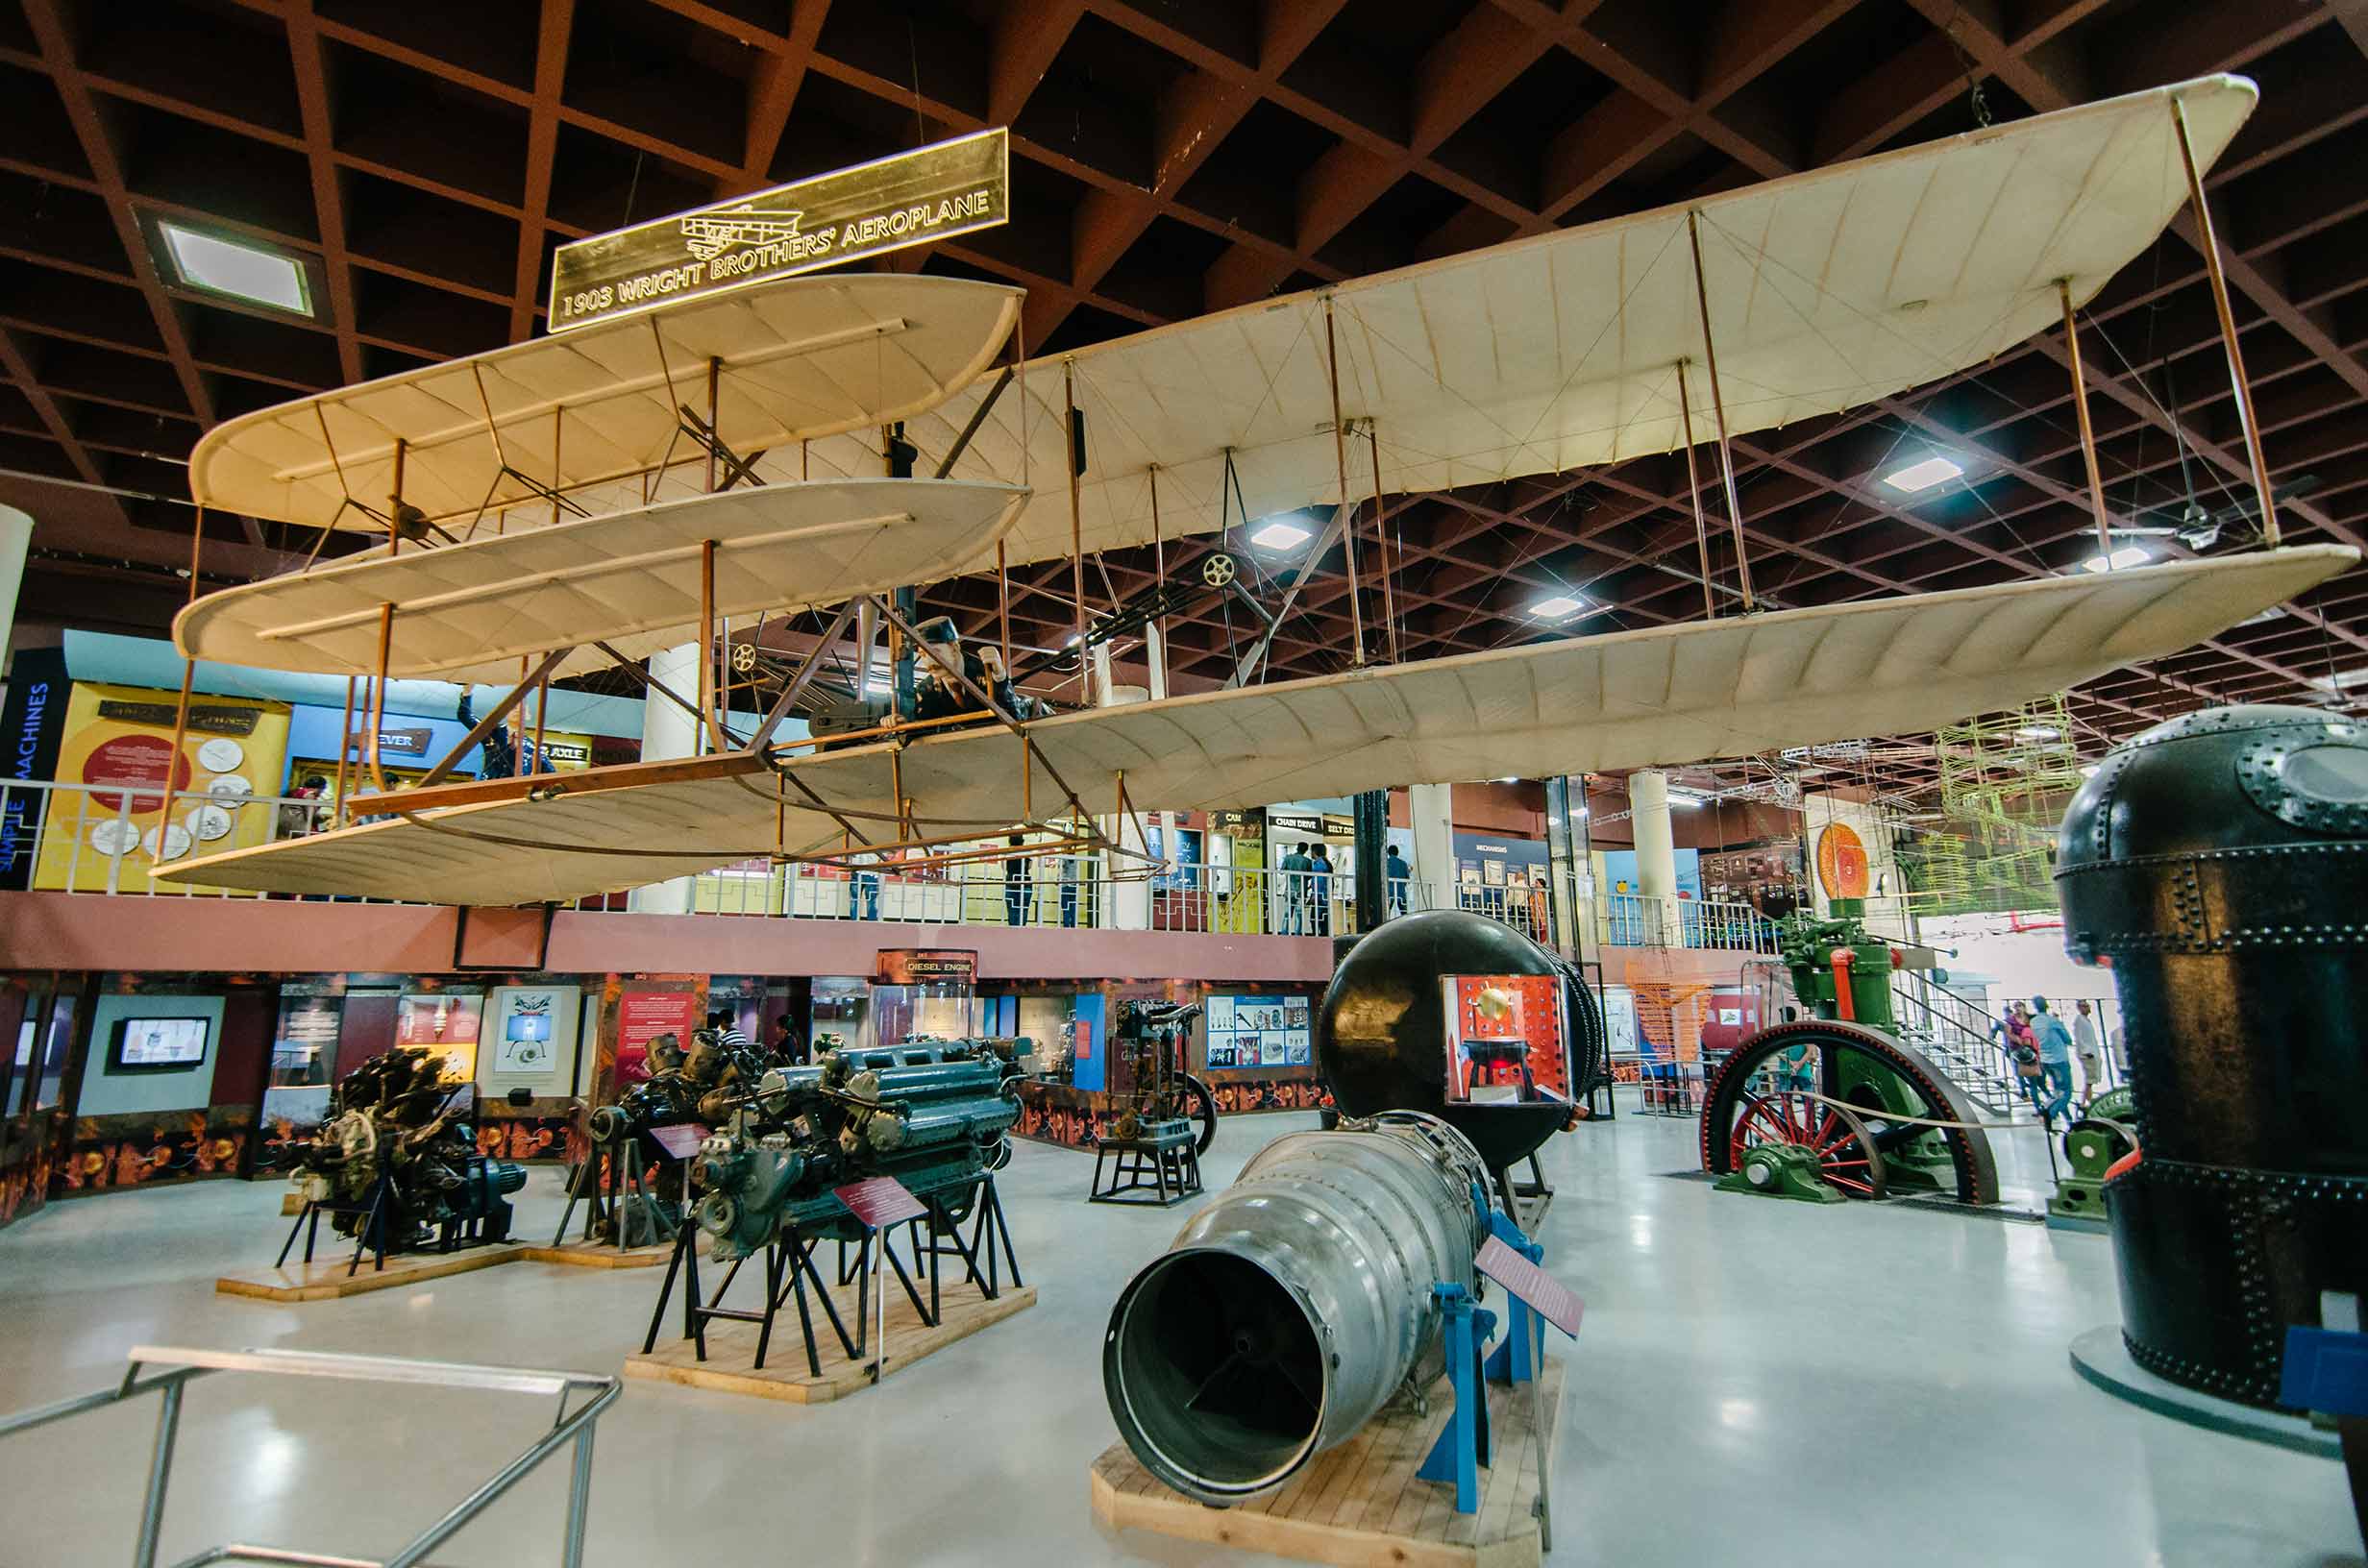 Model of 1903 Wright brothers' aircraft 